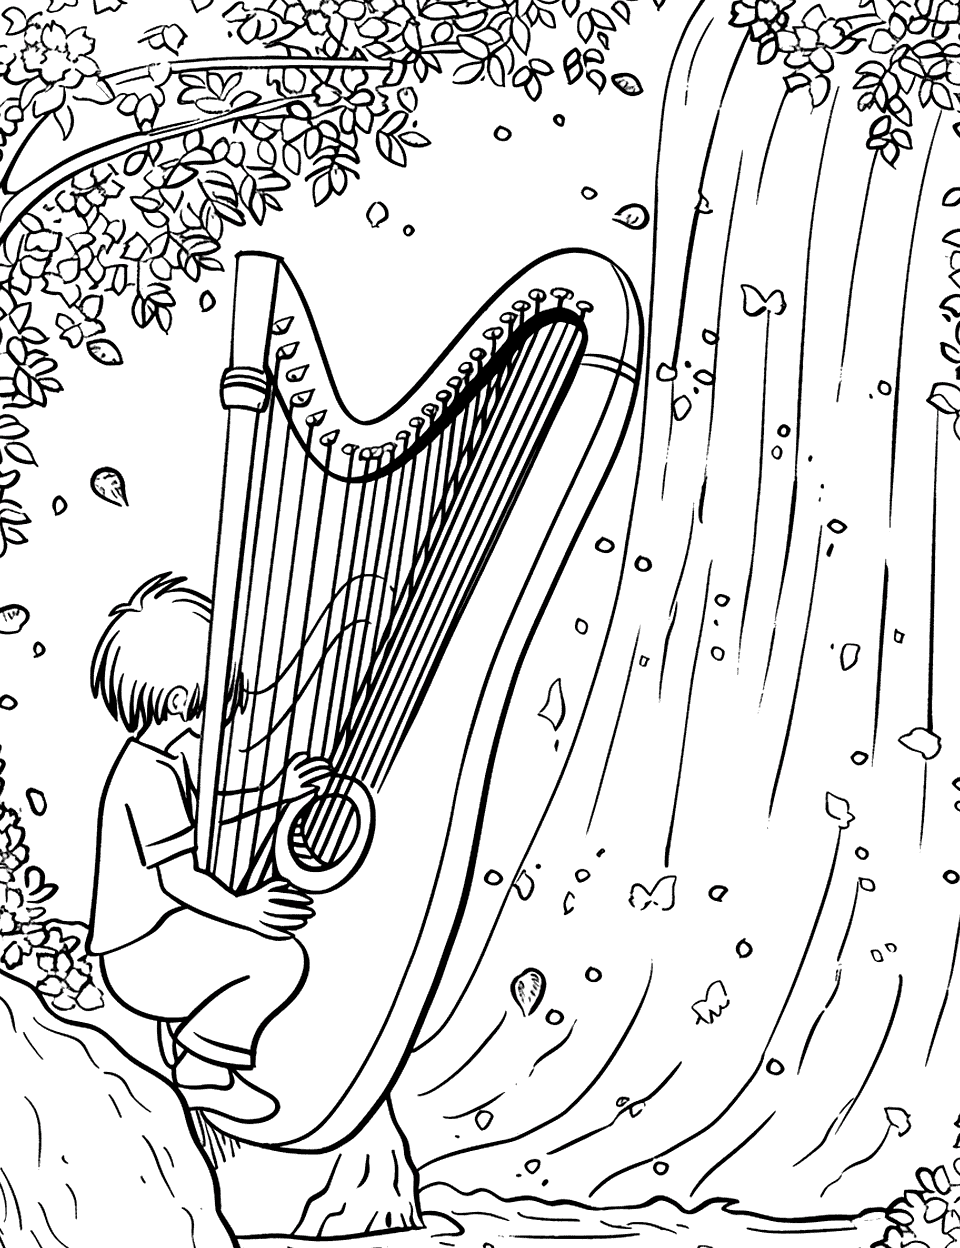 Fantasy Harp by the Waterfall Music Coloring Page - A mystical scene with a child playing a harp by a sparkling waterfall.